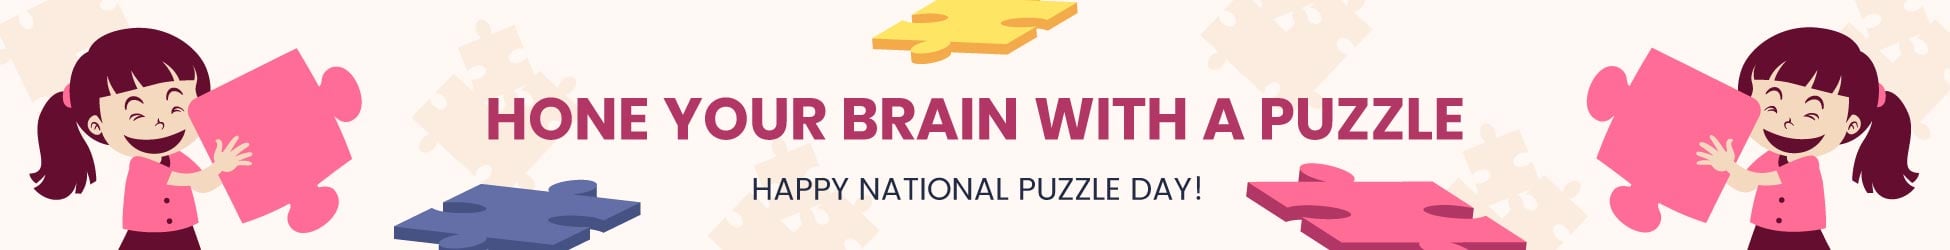 National Puzzle Day Website Banner